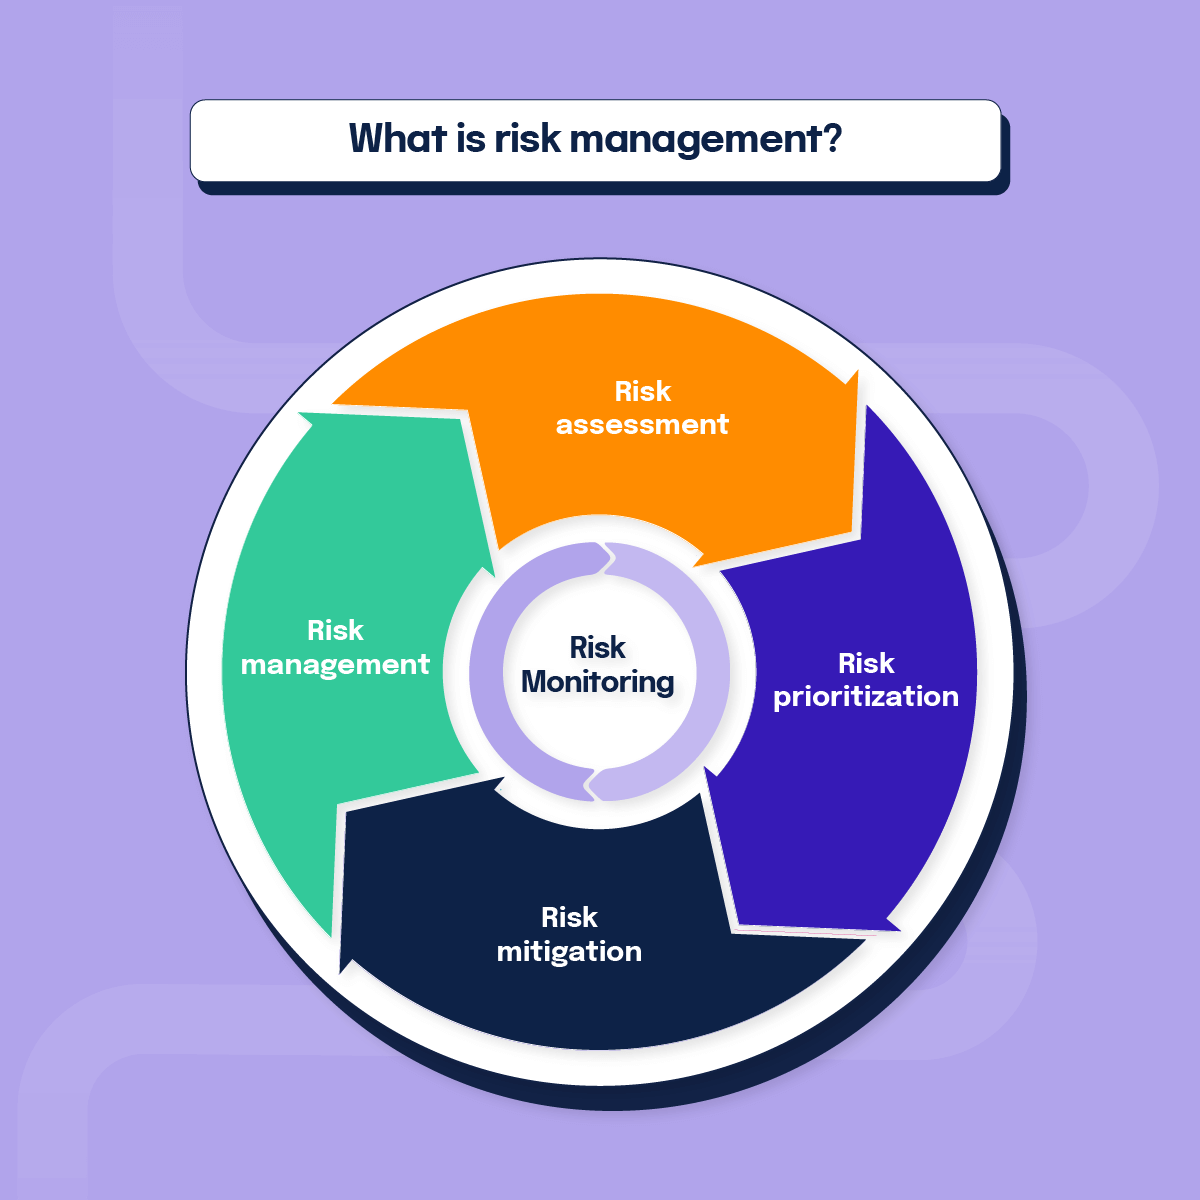 The 5 parts of risk management cycle are risk monitoring, risk assessment, risk prioritization, risk mitigation and risk management